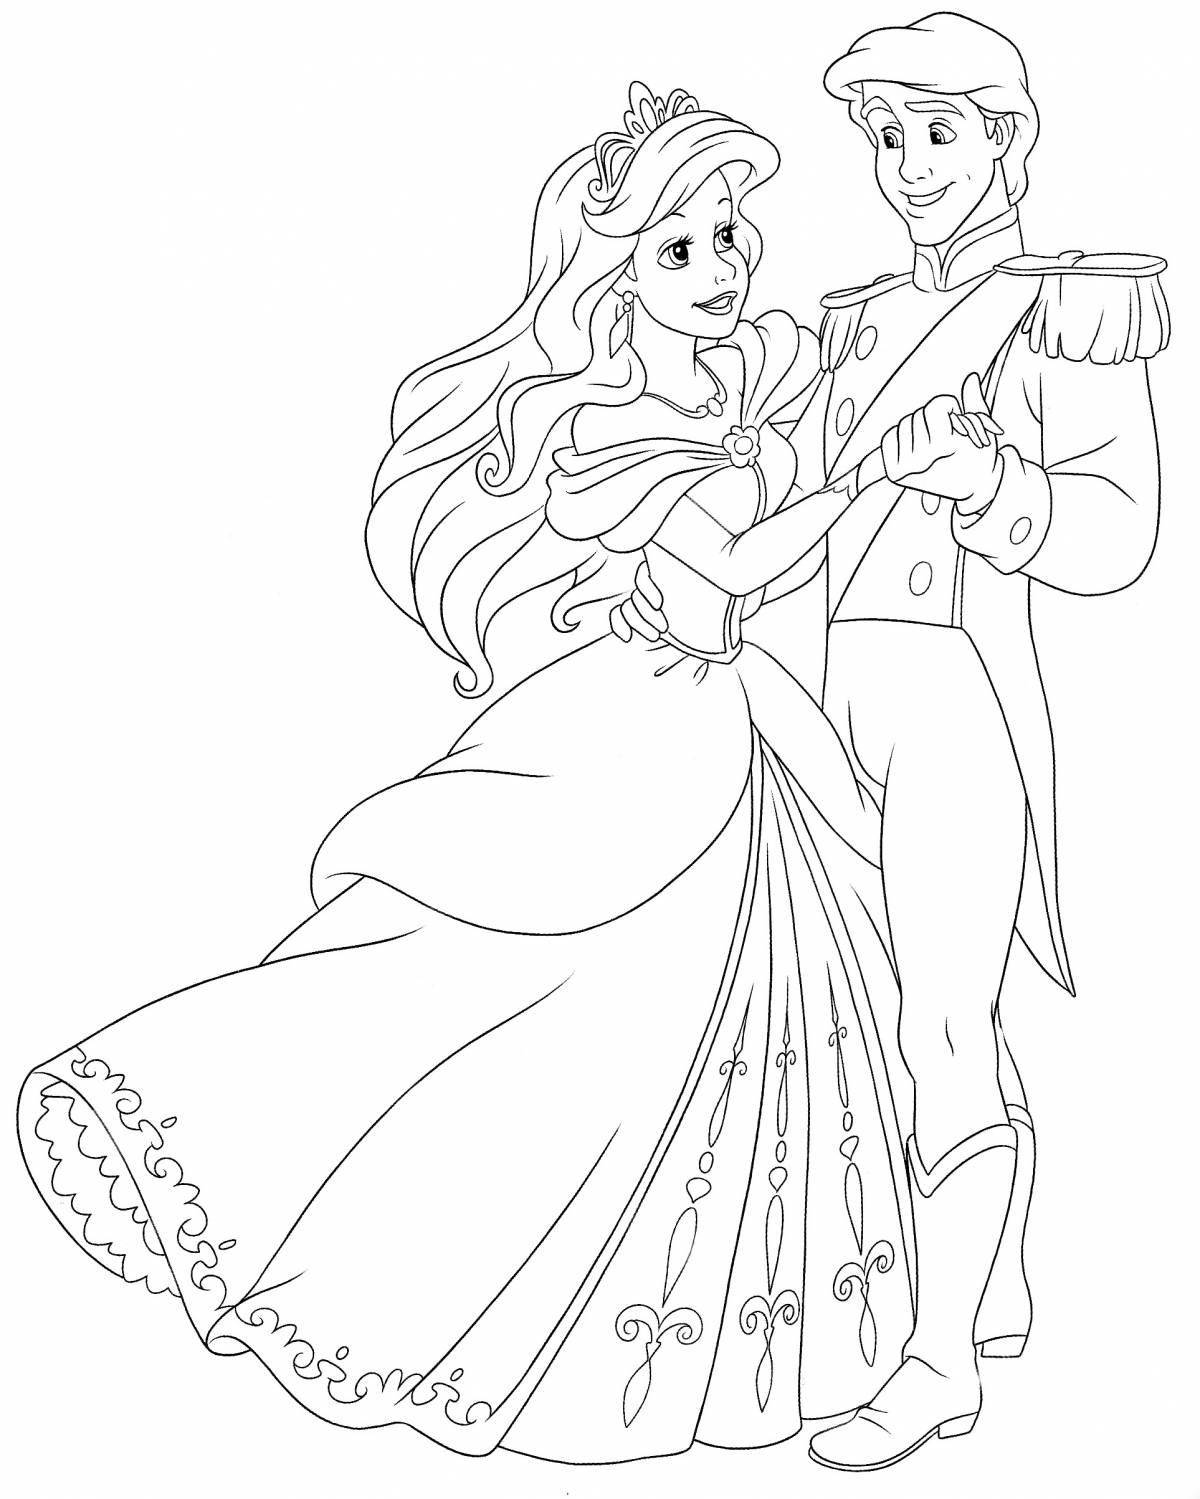 Fabulous princess and prince coloring pages for kids